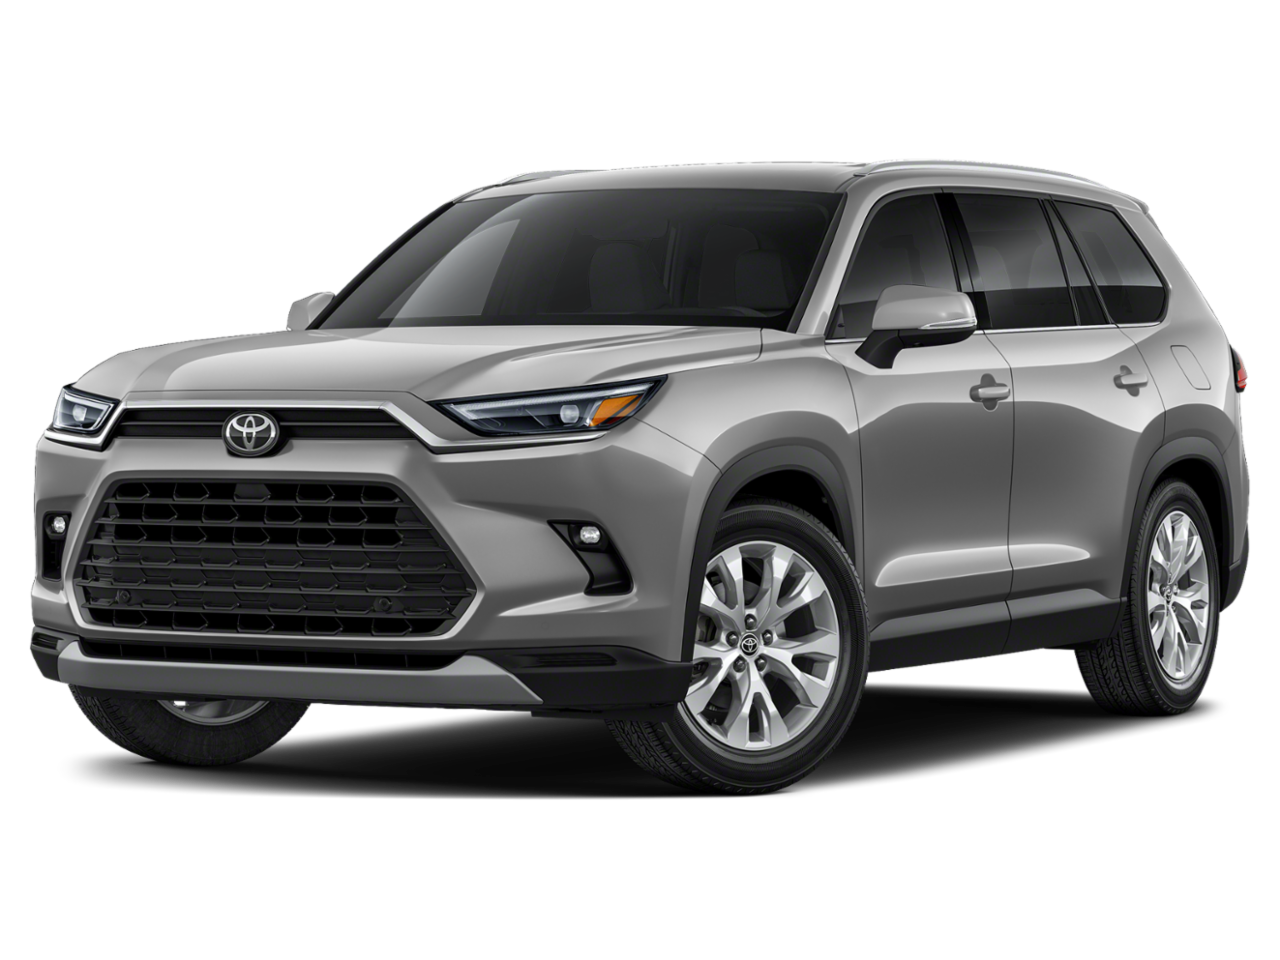 New Toyota Grand Highlander from your North Aurora, IL dealership